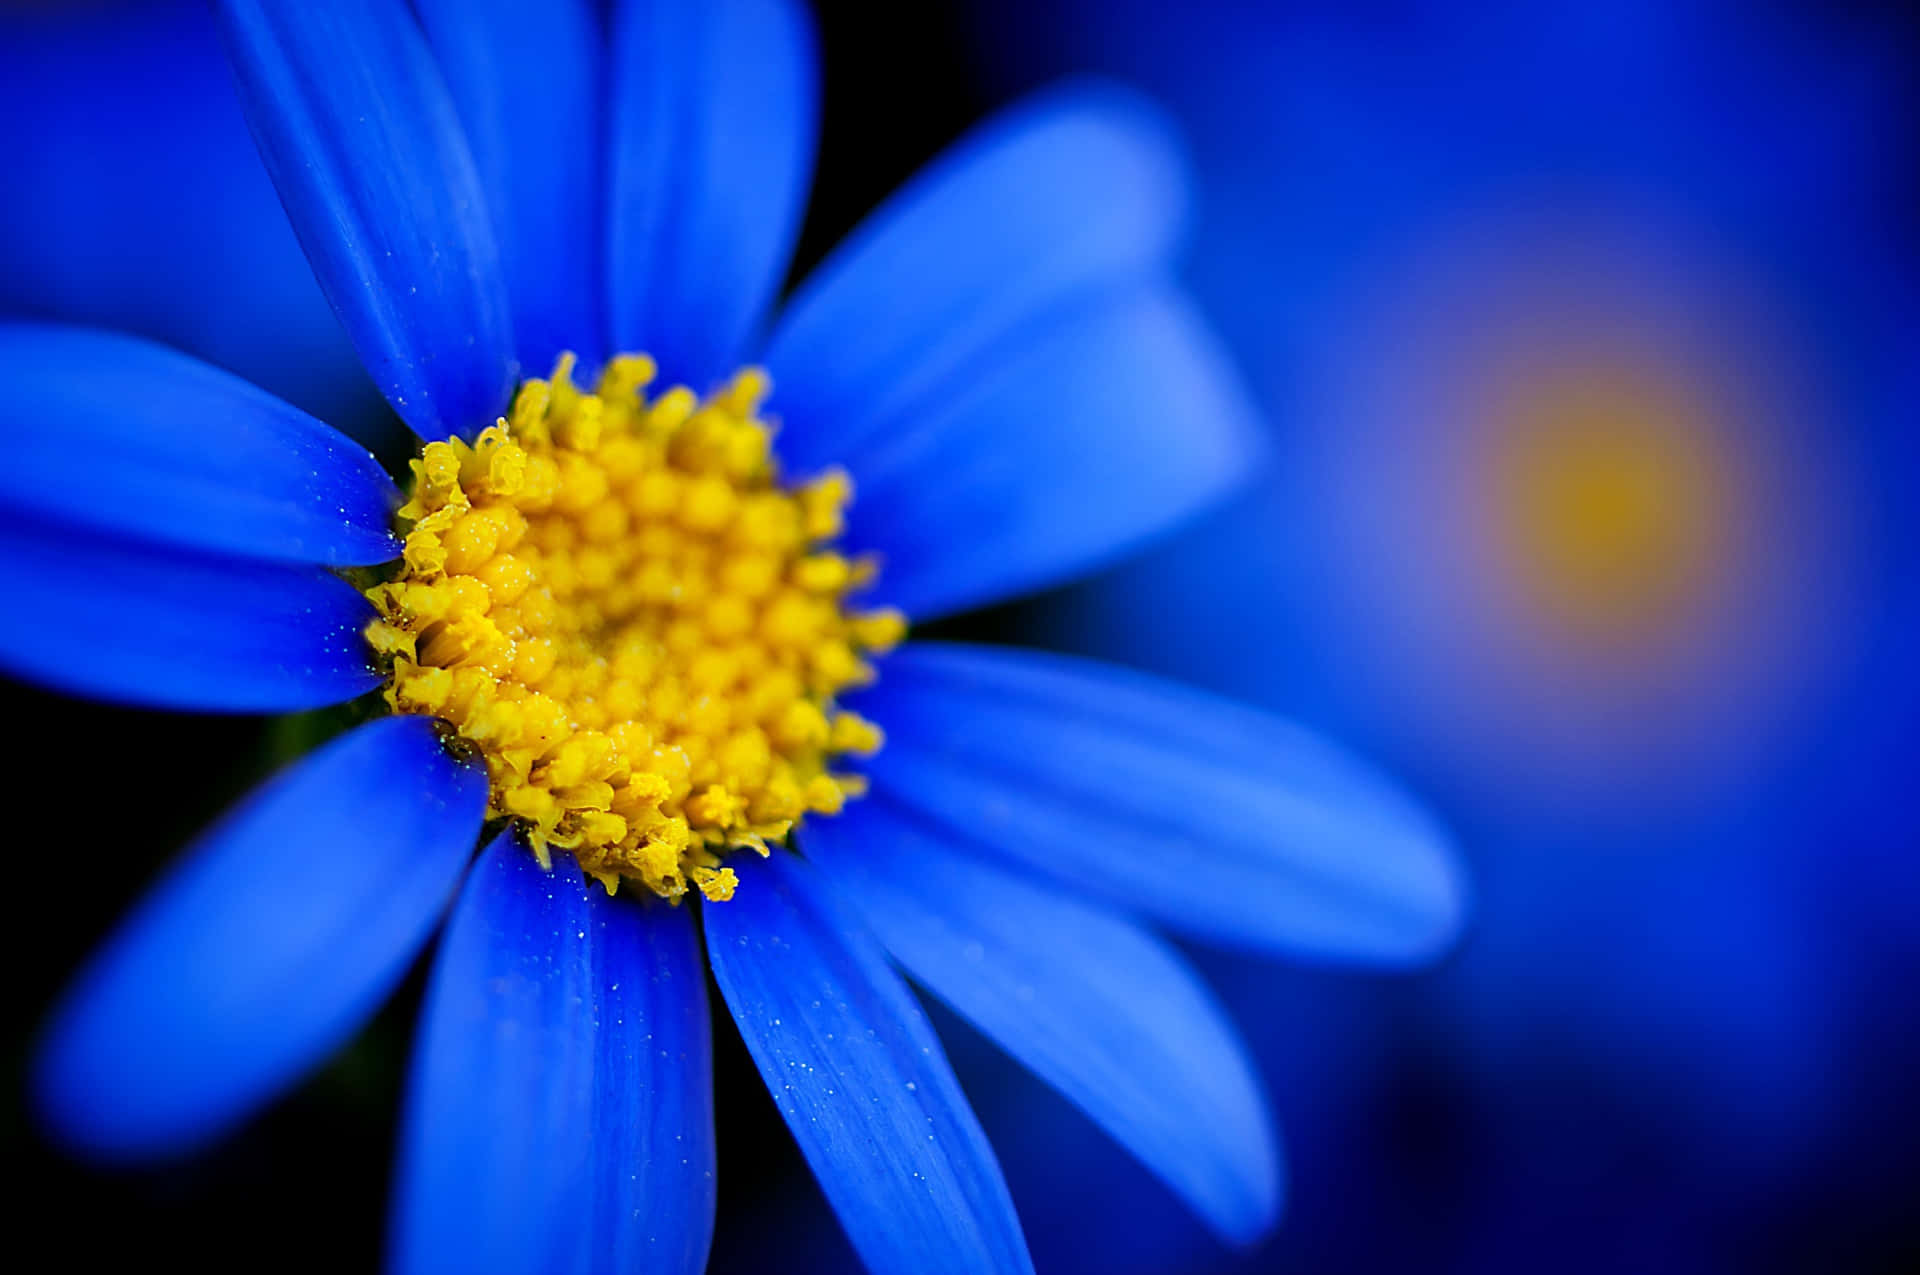 A Blue Flower With Yellow Center In The Background Wallpaper